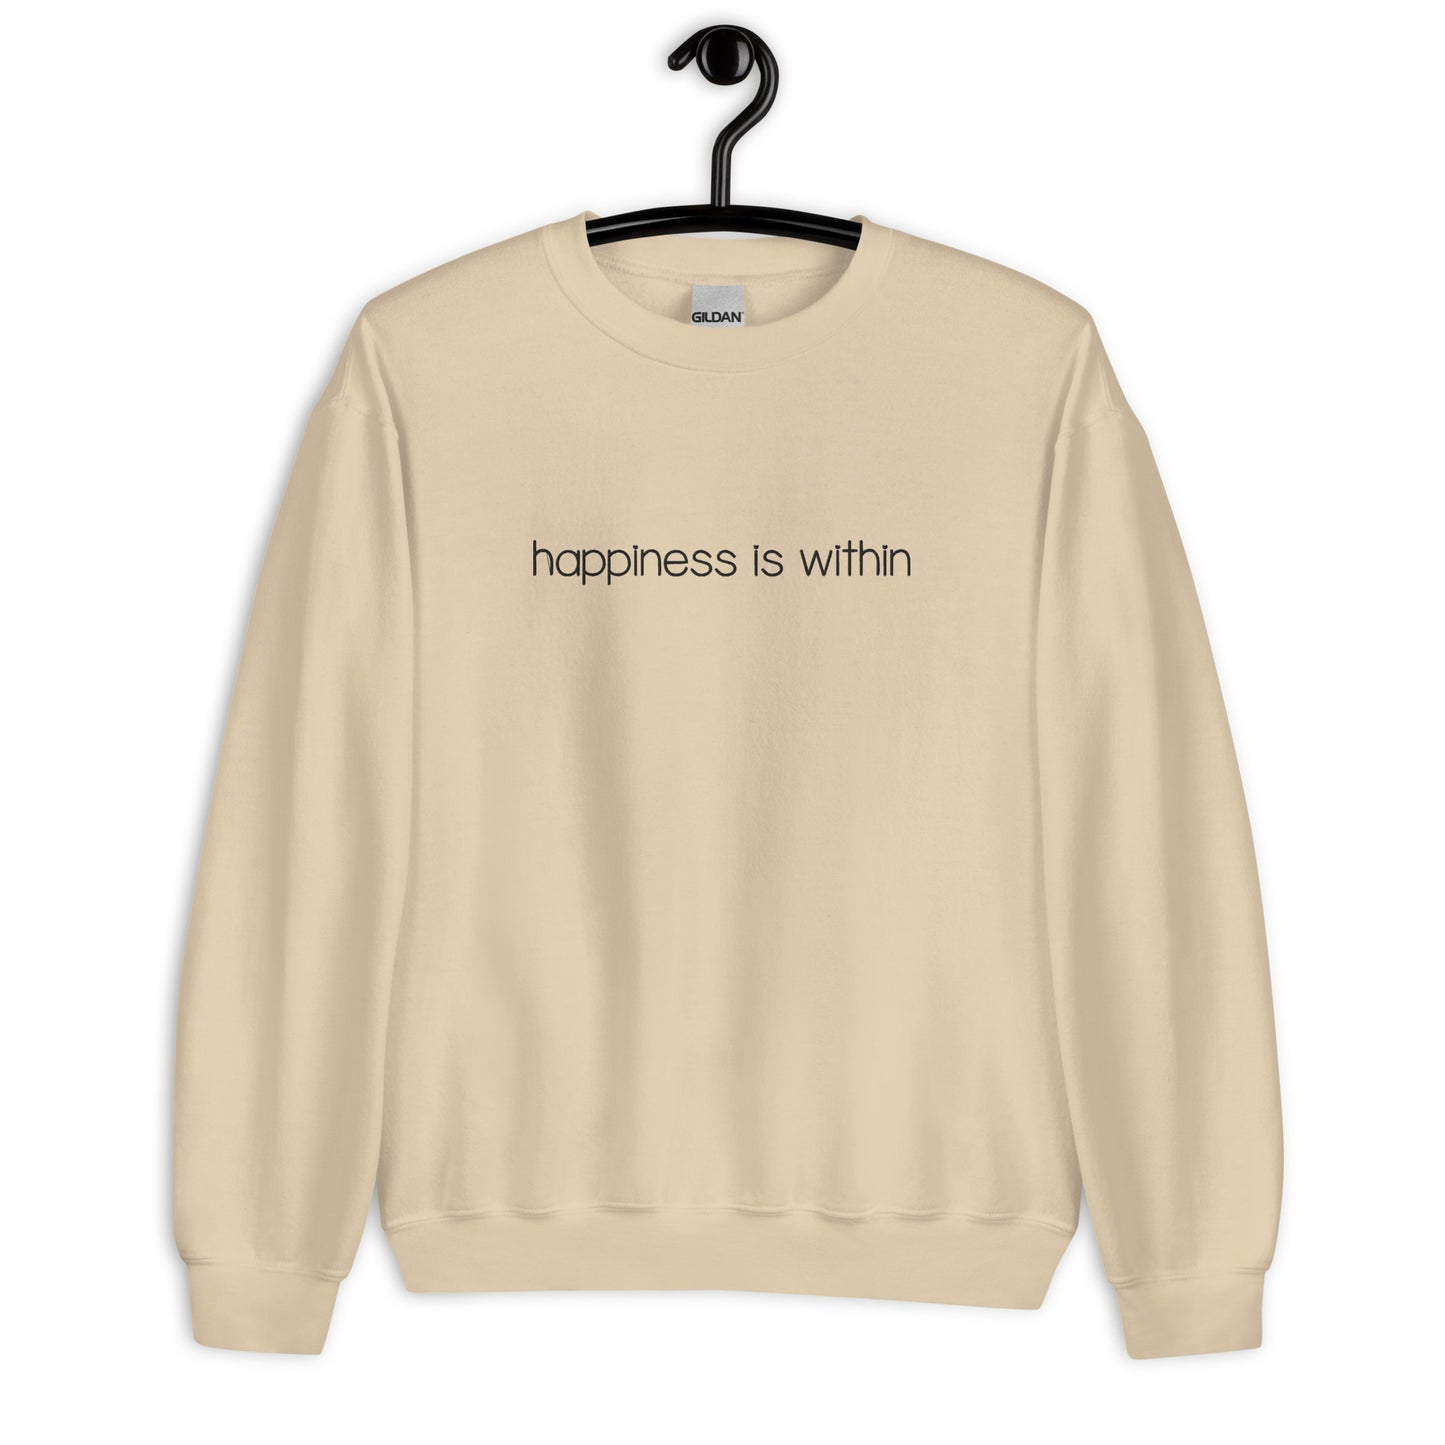 Happiness is Within Embroidered Sweatshirt